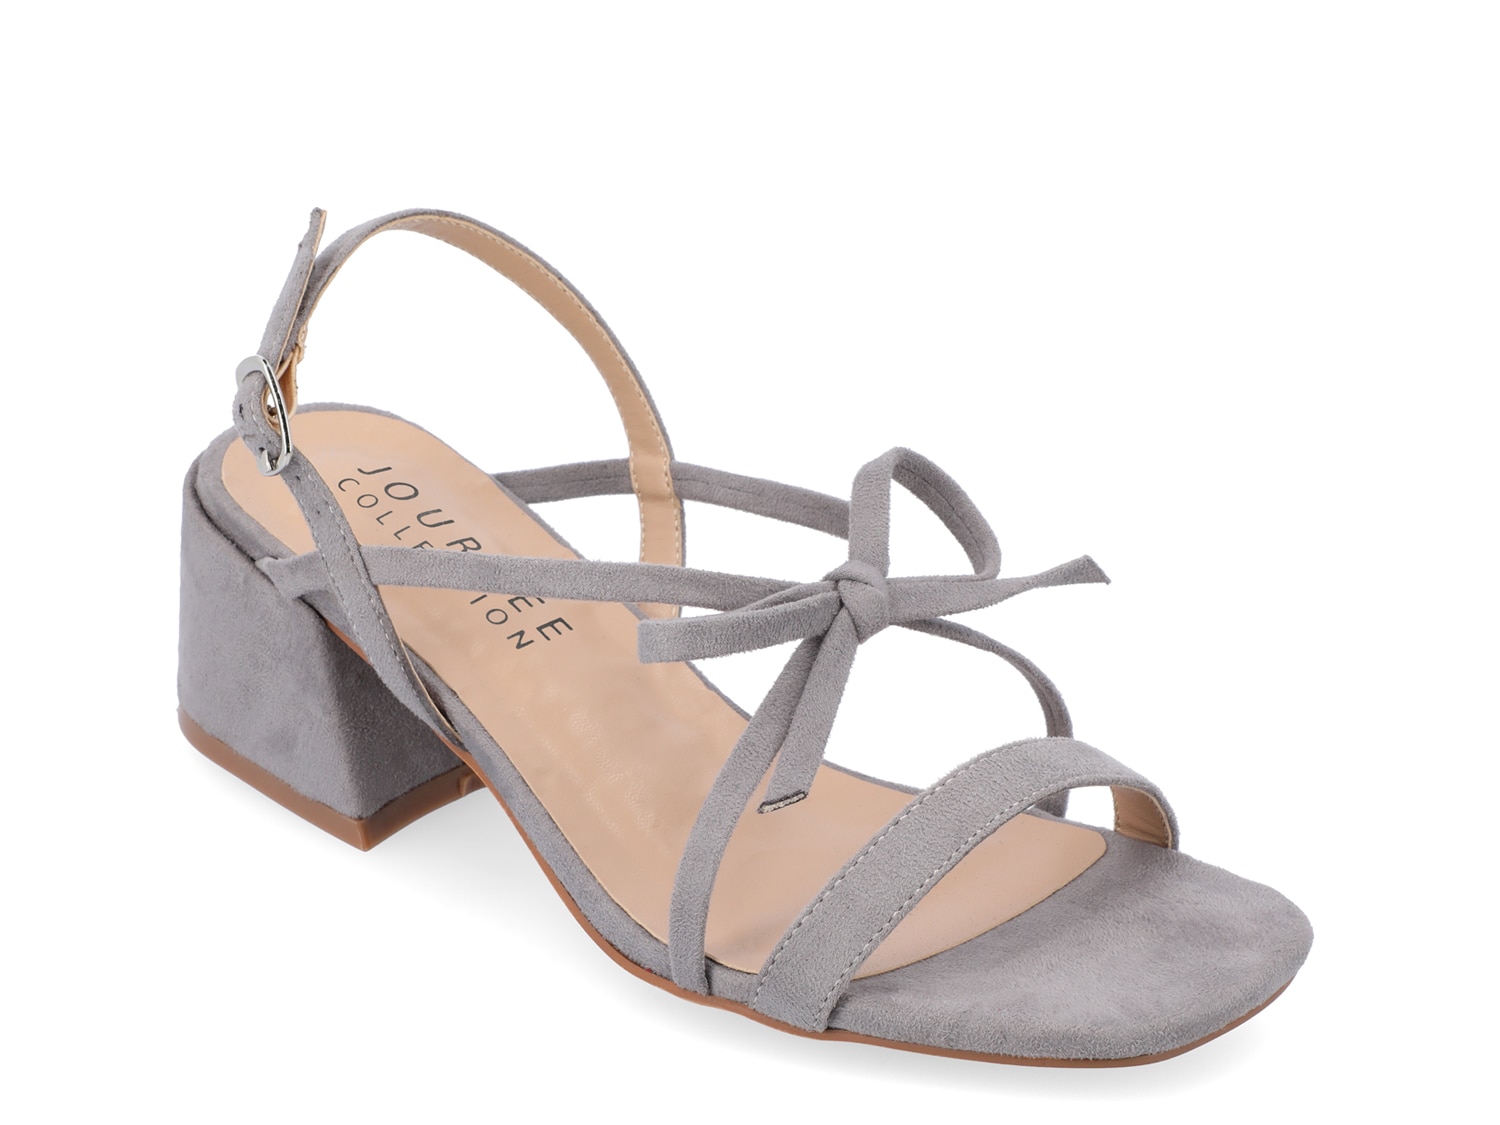 Journee Collection Amity Sandal - Free Shipping